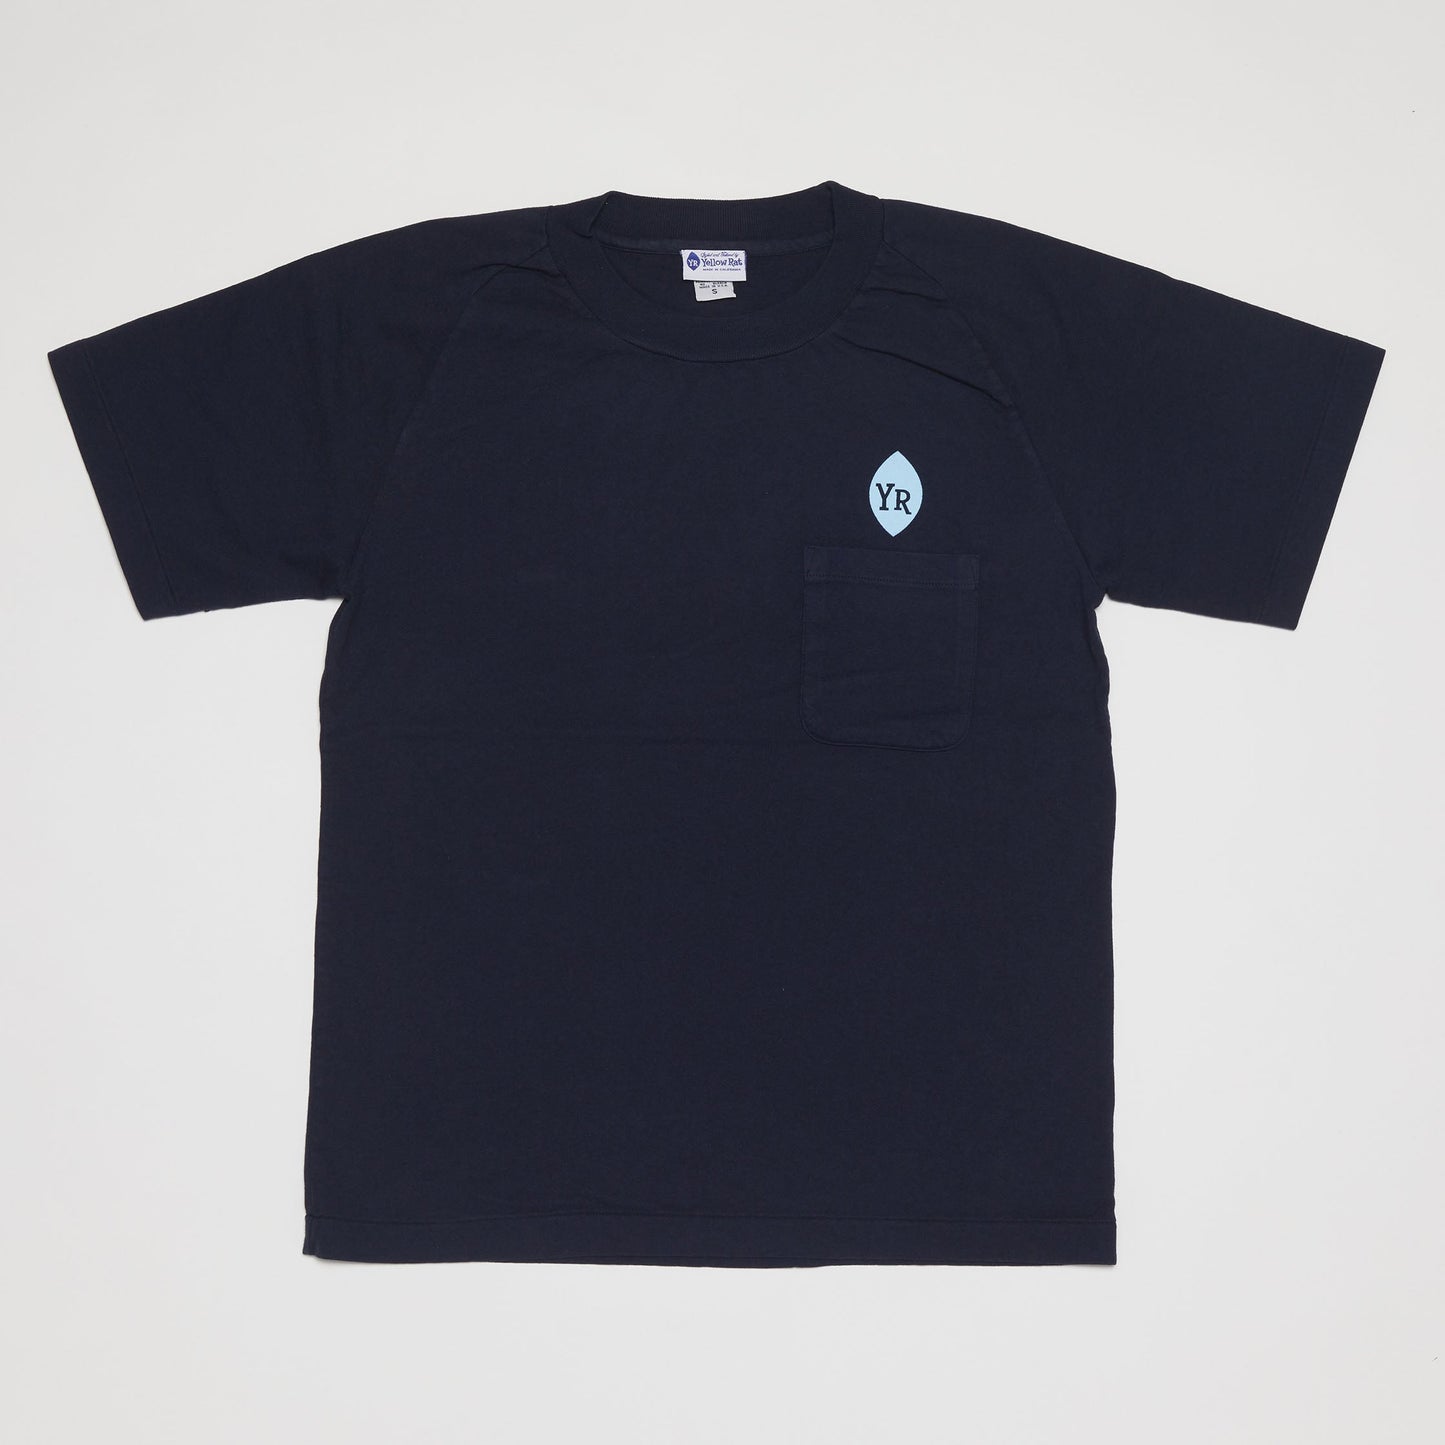 Some Like It Smooth T-Shirt II (Navy)